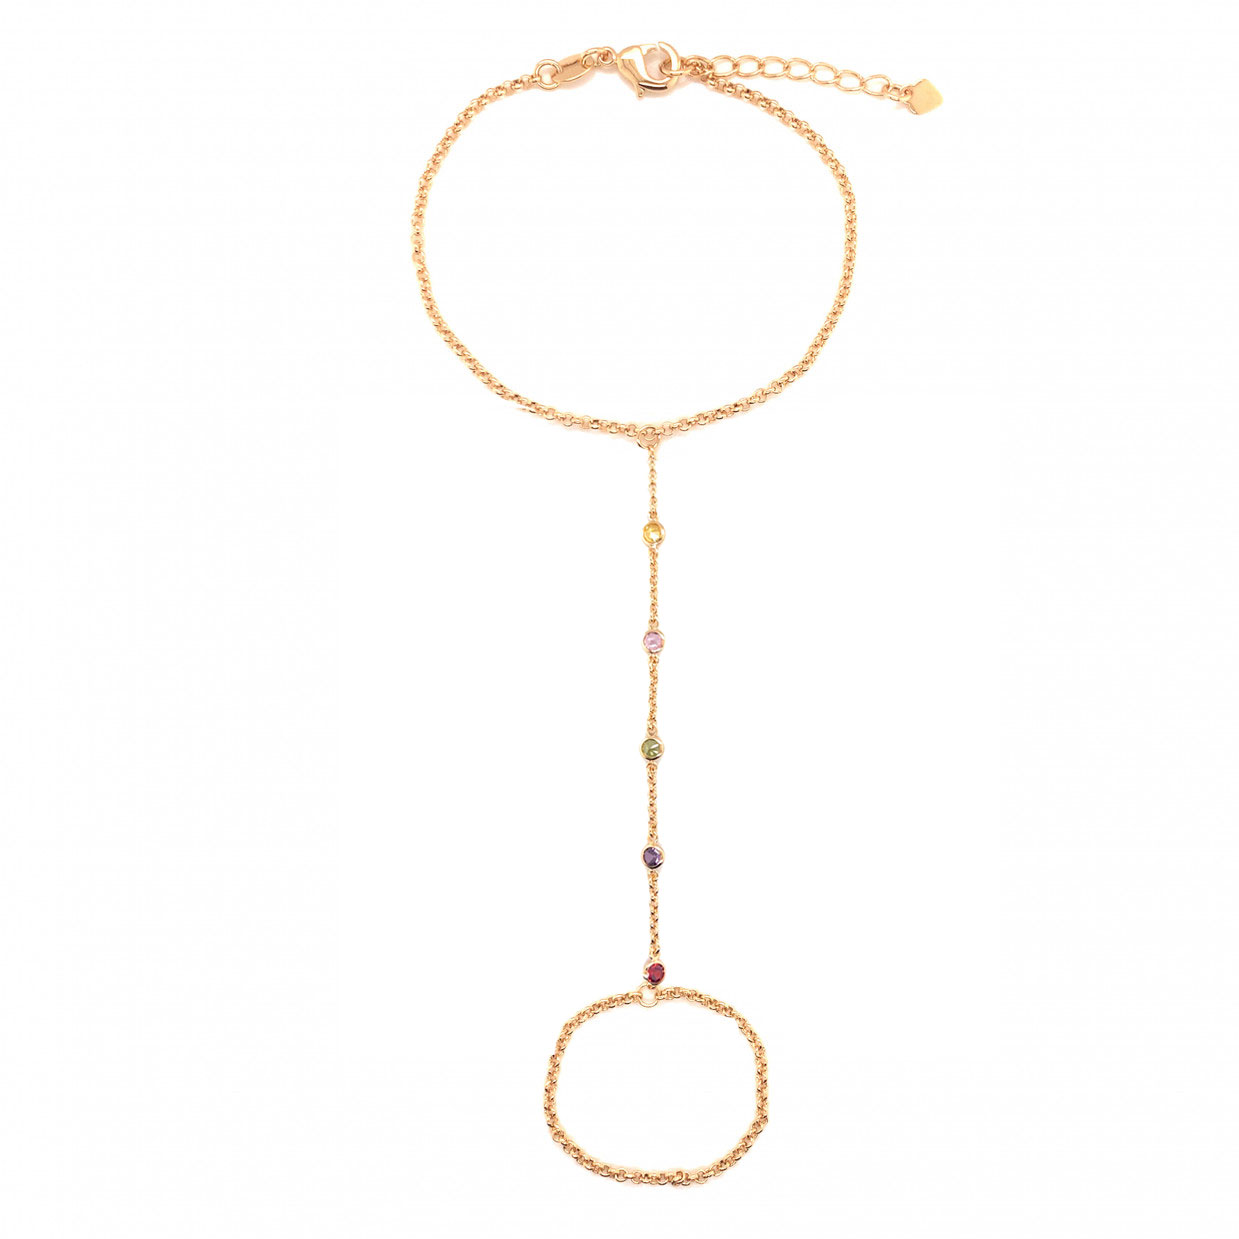 Colored Crystal Hand Chain 7" + 1.5" Extension - Gold Filled